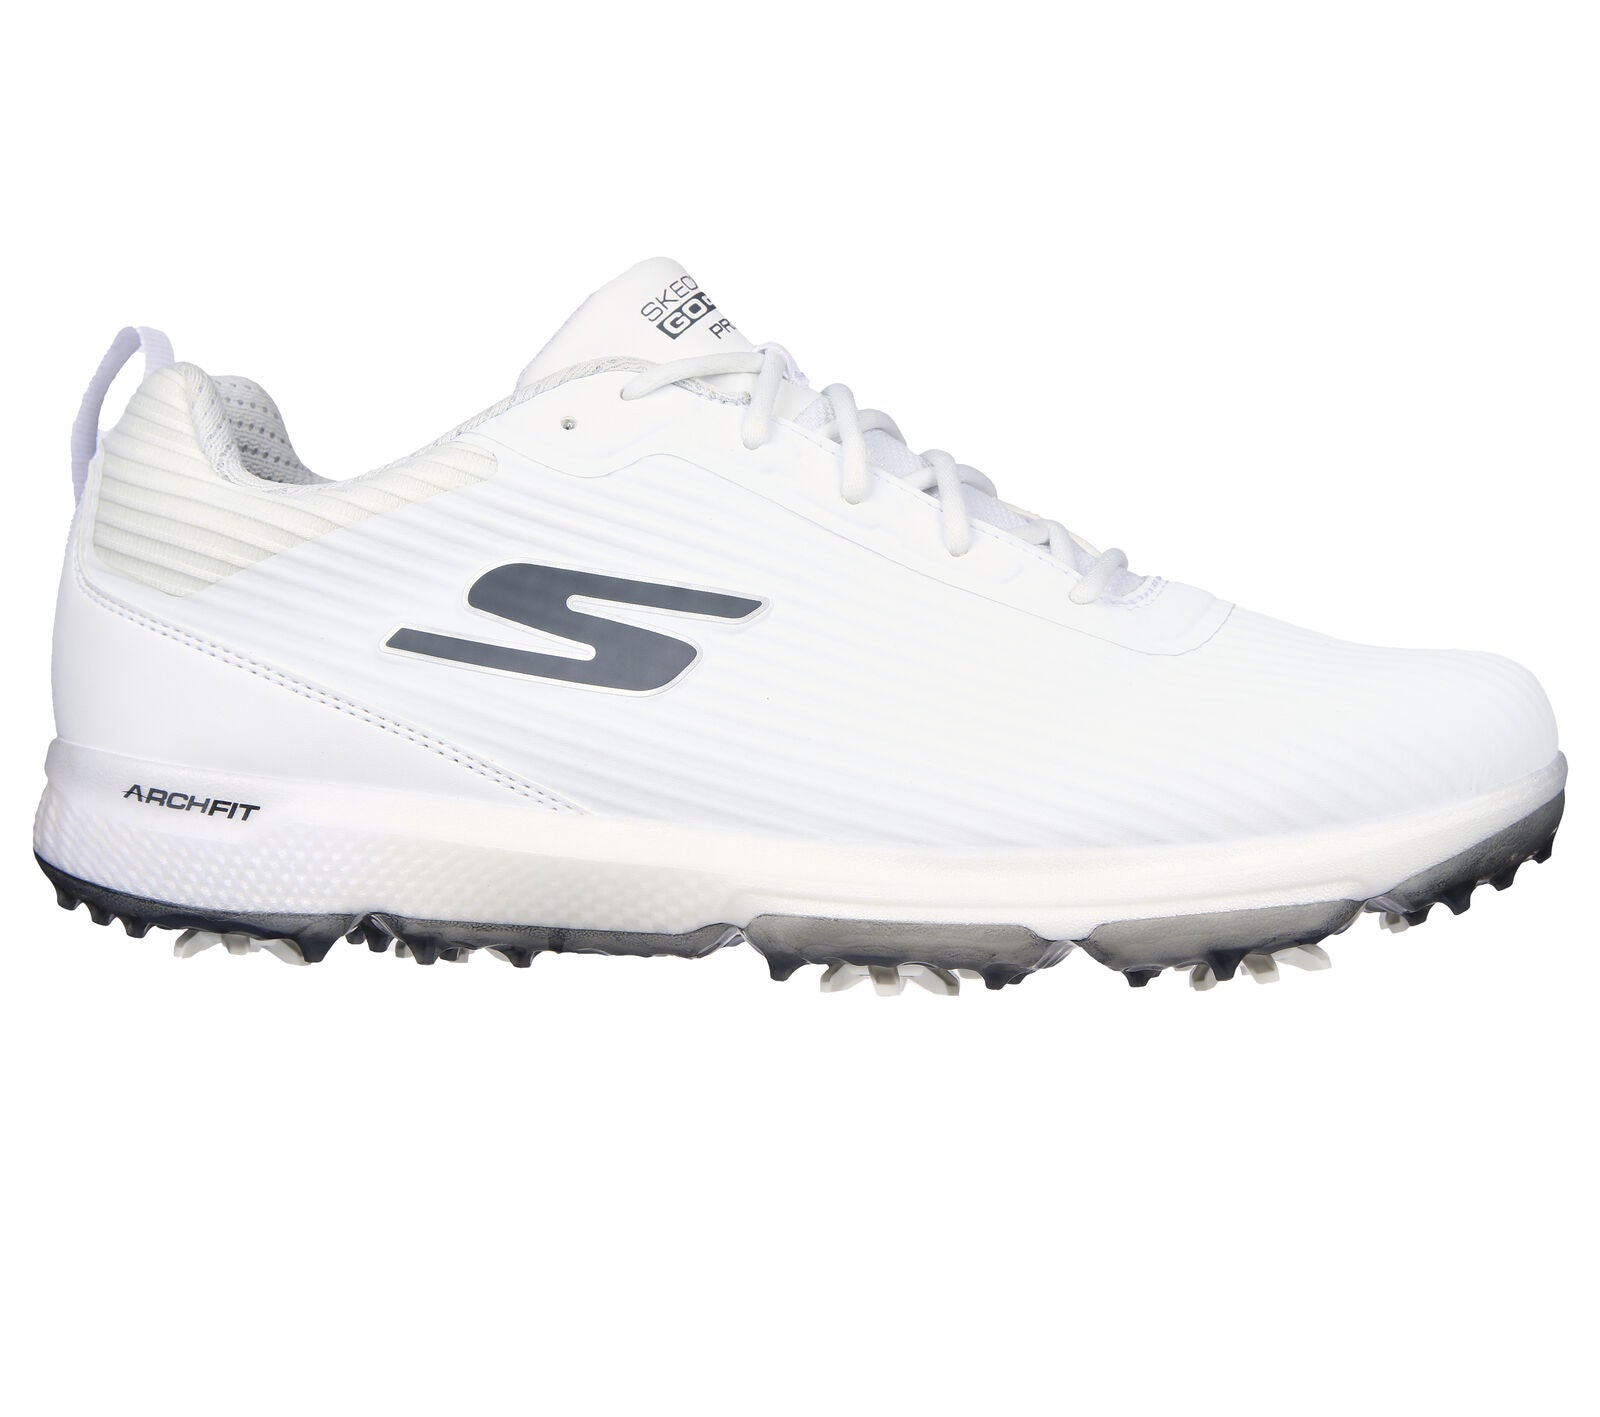 Skechers Performance Football Boots Now Available